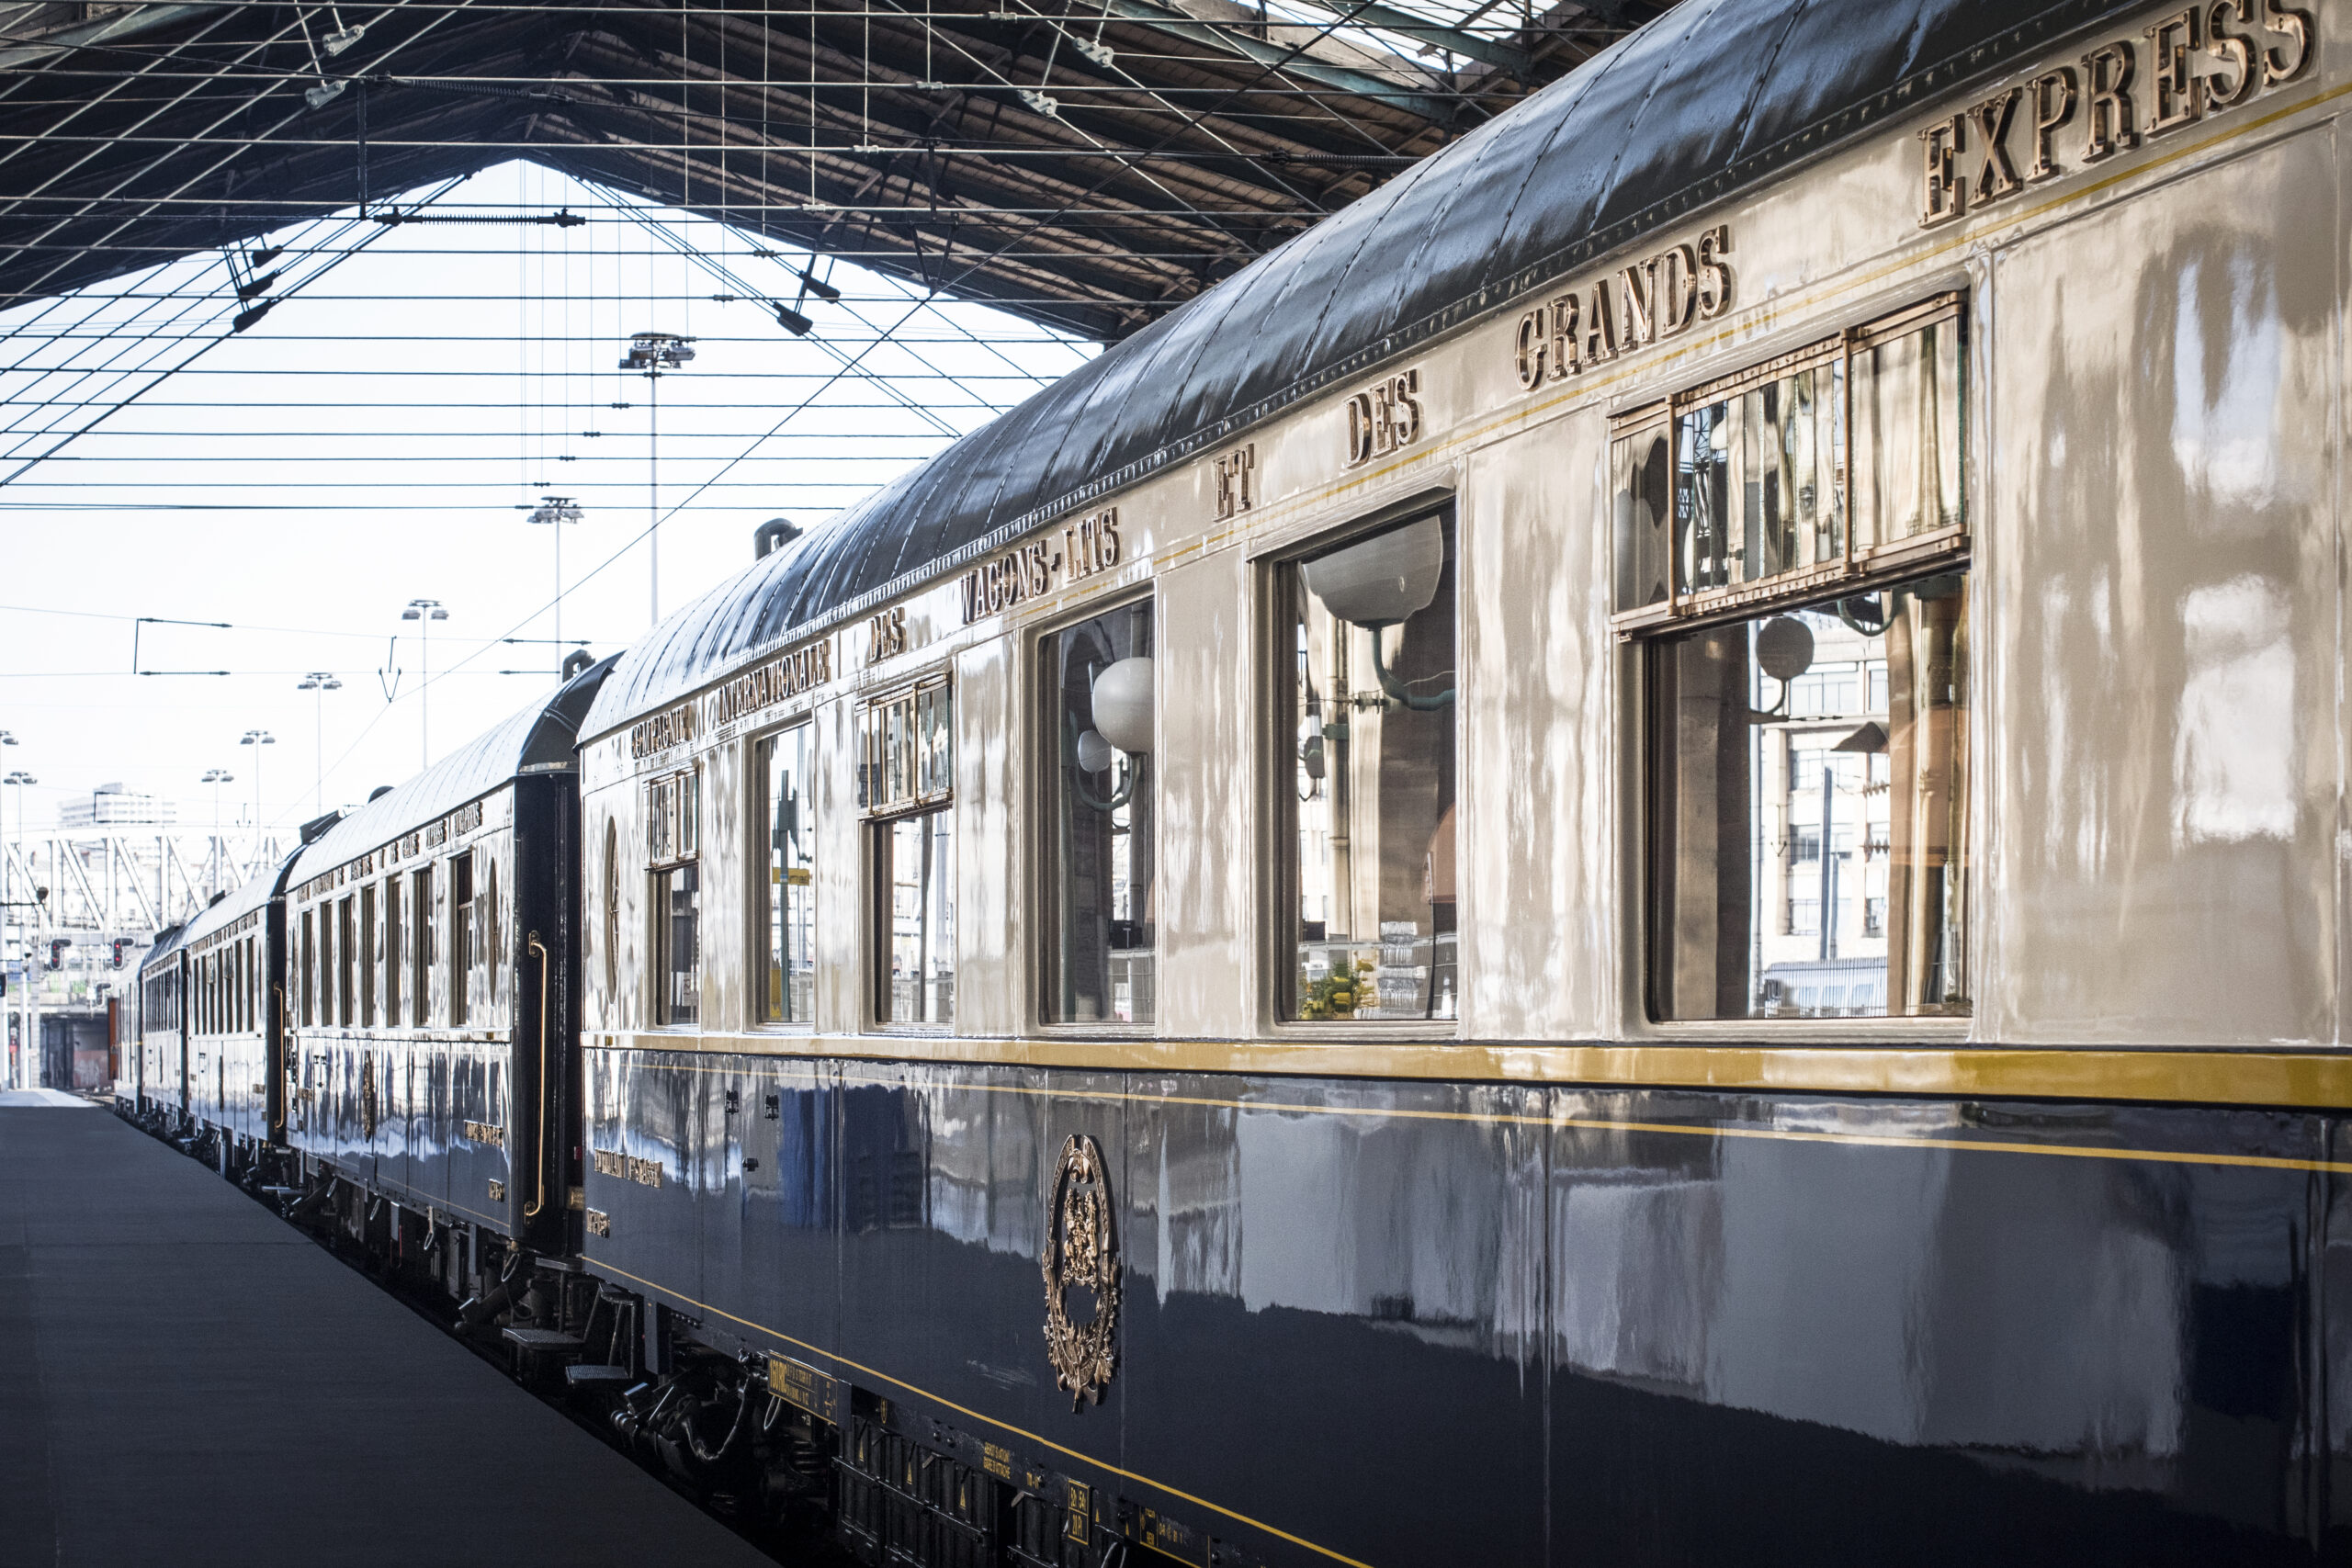 mystery tours are provided by anglo french train service